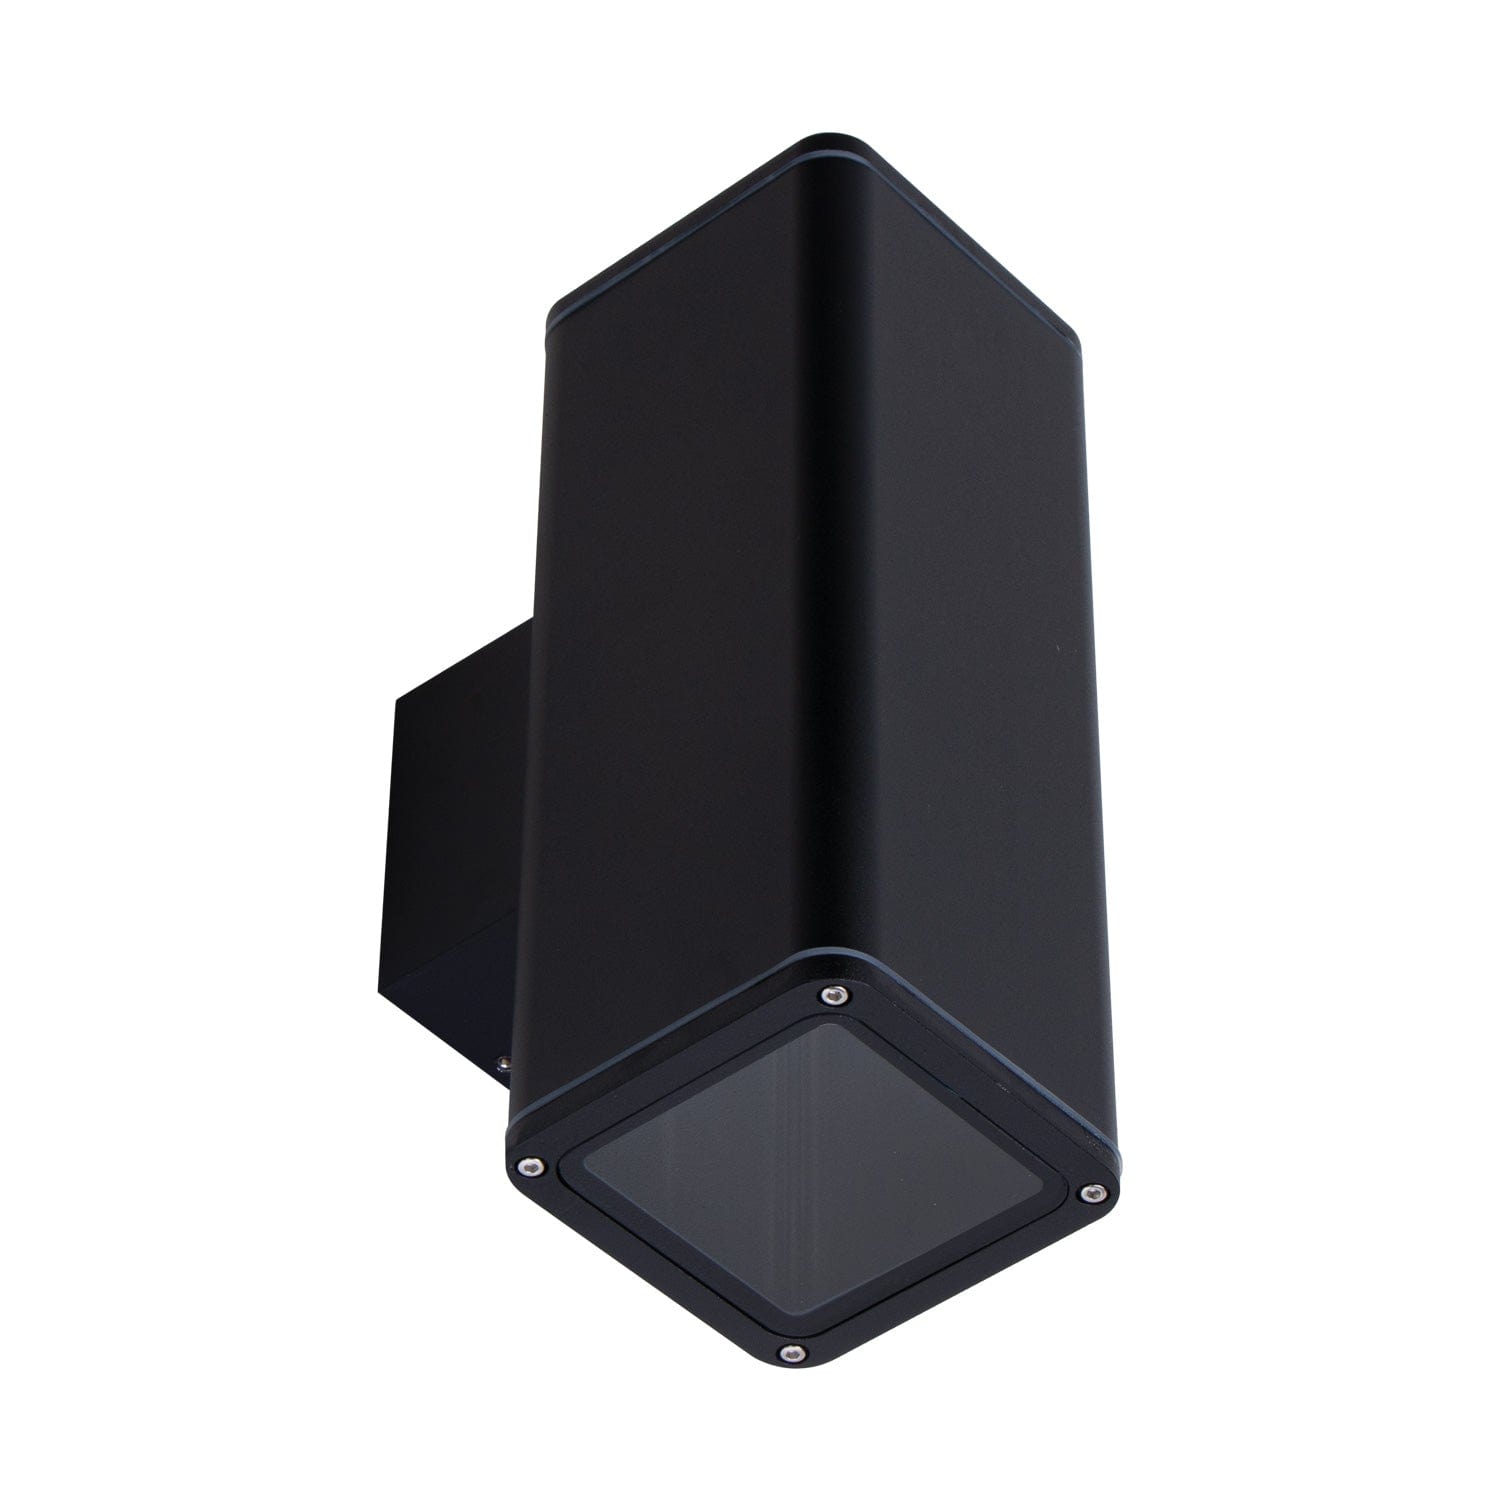 Domus Lighting Outdoor Wall Lights BLACK / NO LAMP DOMUS PIPER-2 SQUARE LED WALL LIGHT Lights-For-You 49226